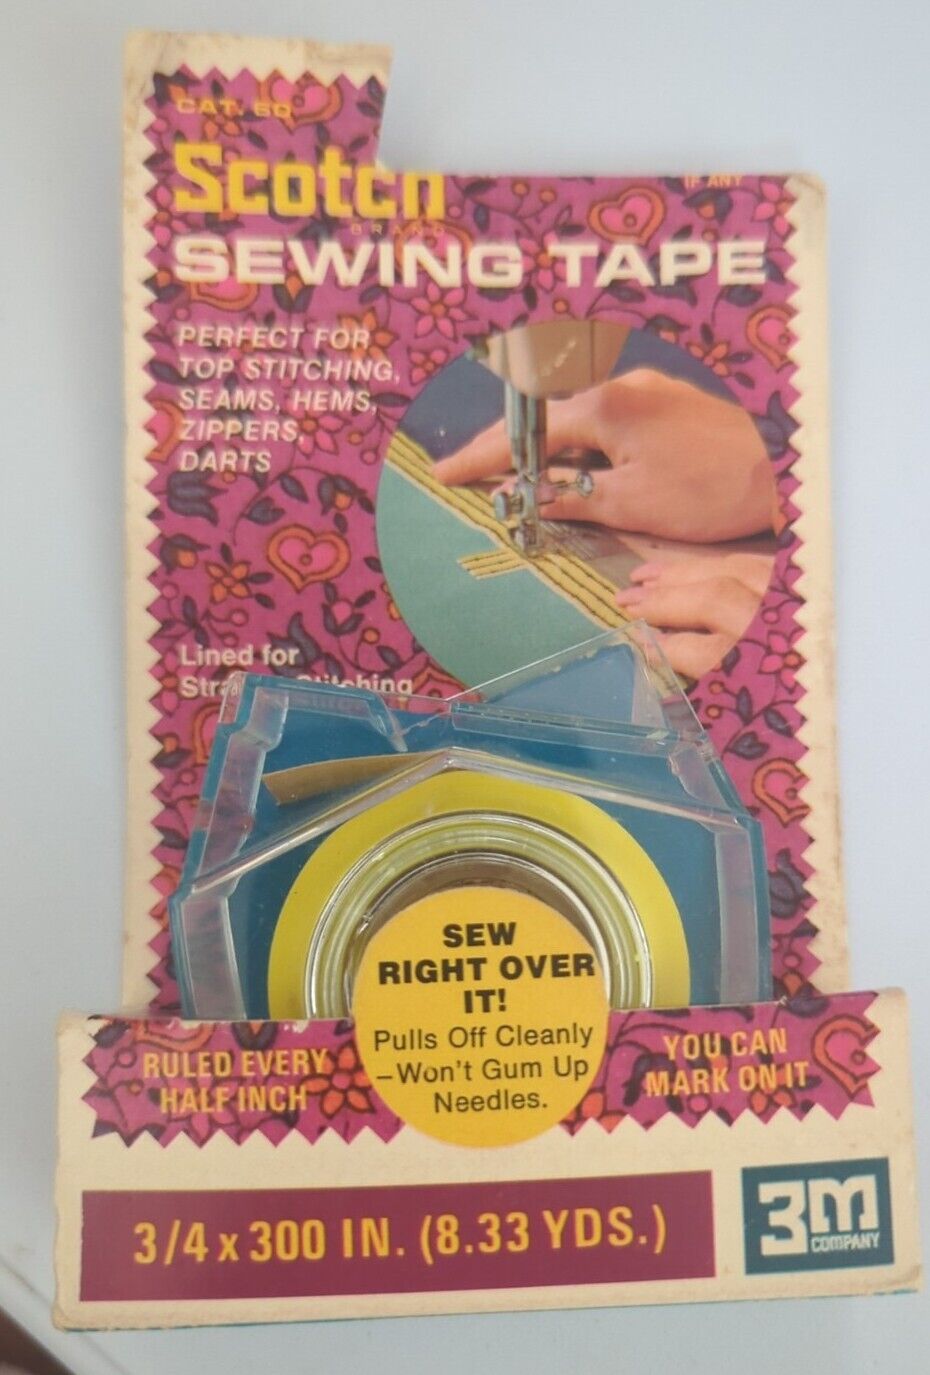 Vintage NOS Scotch 3M Sewing Tape For Top Stitching Seams Hems Zippers Darts 